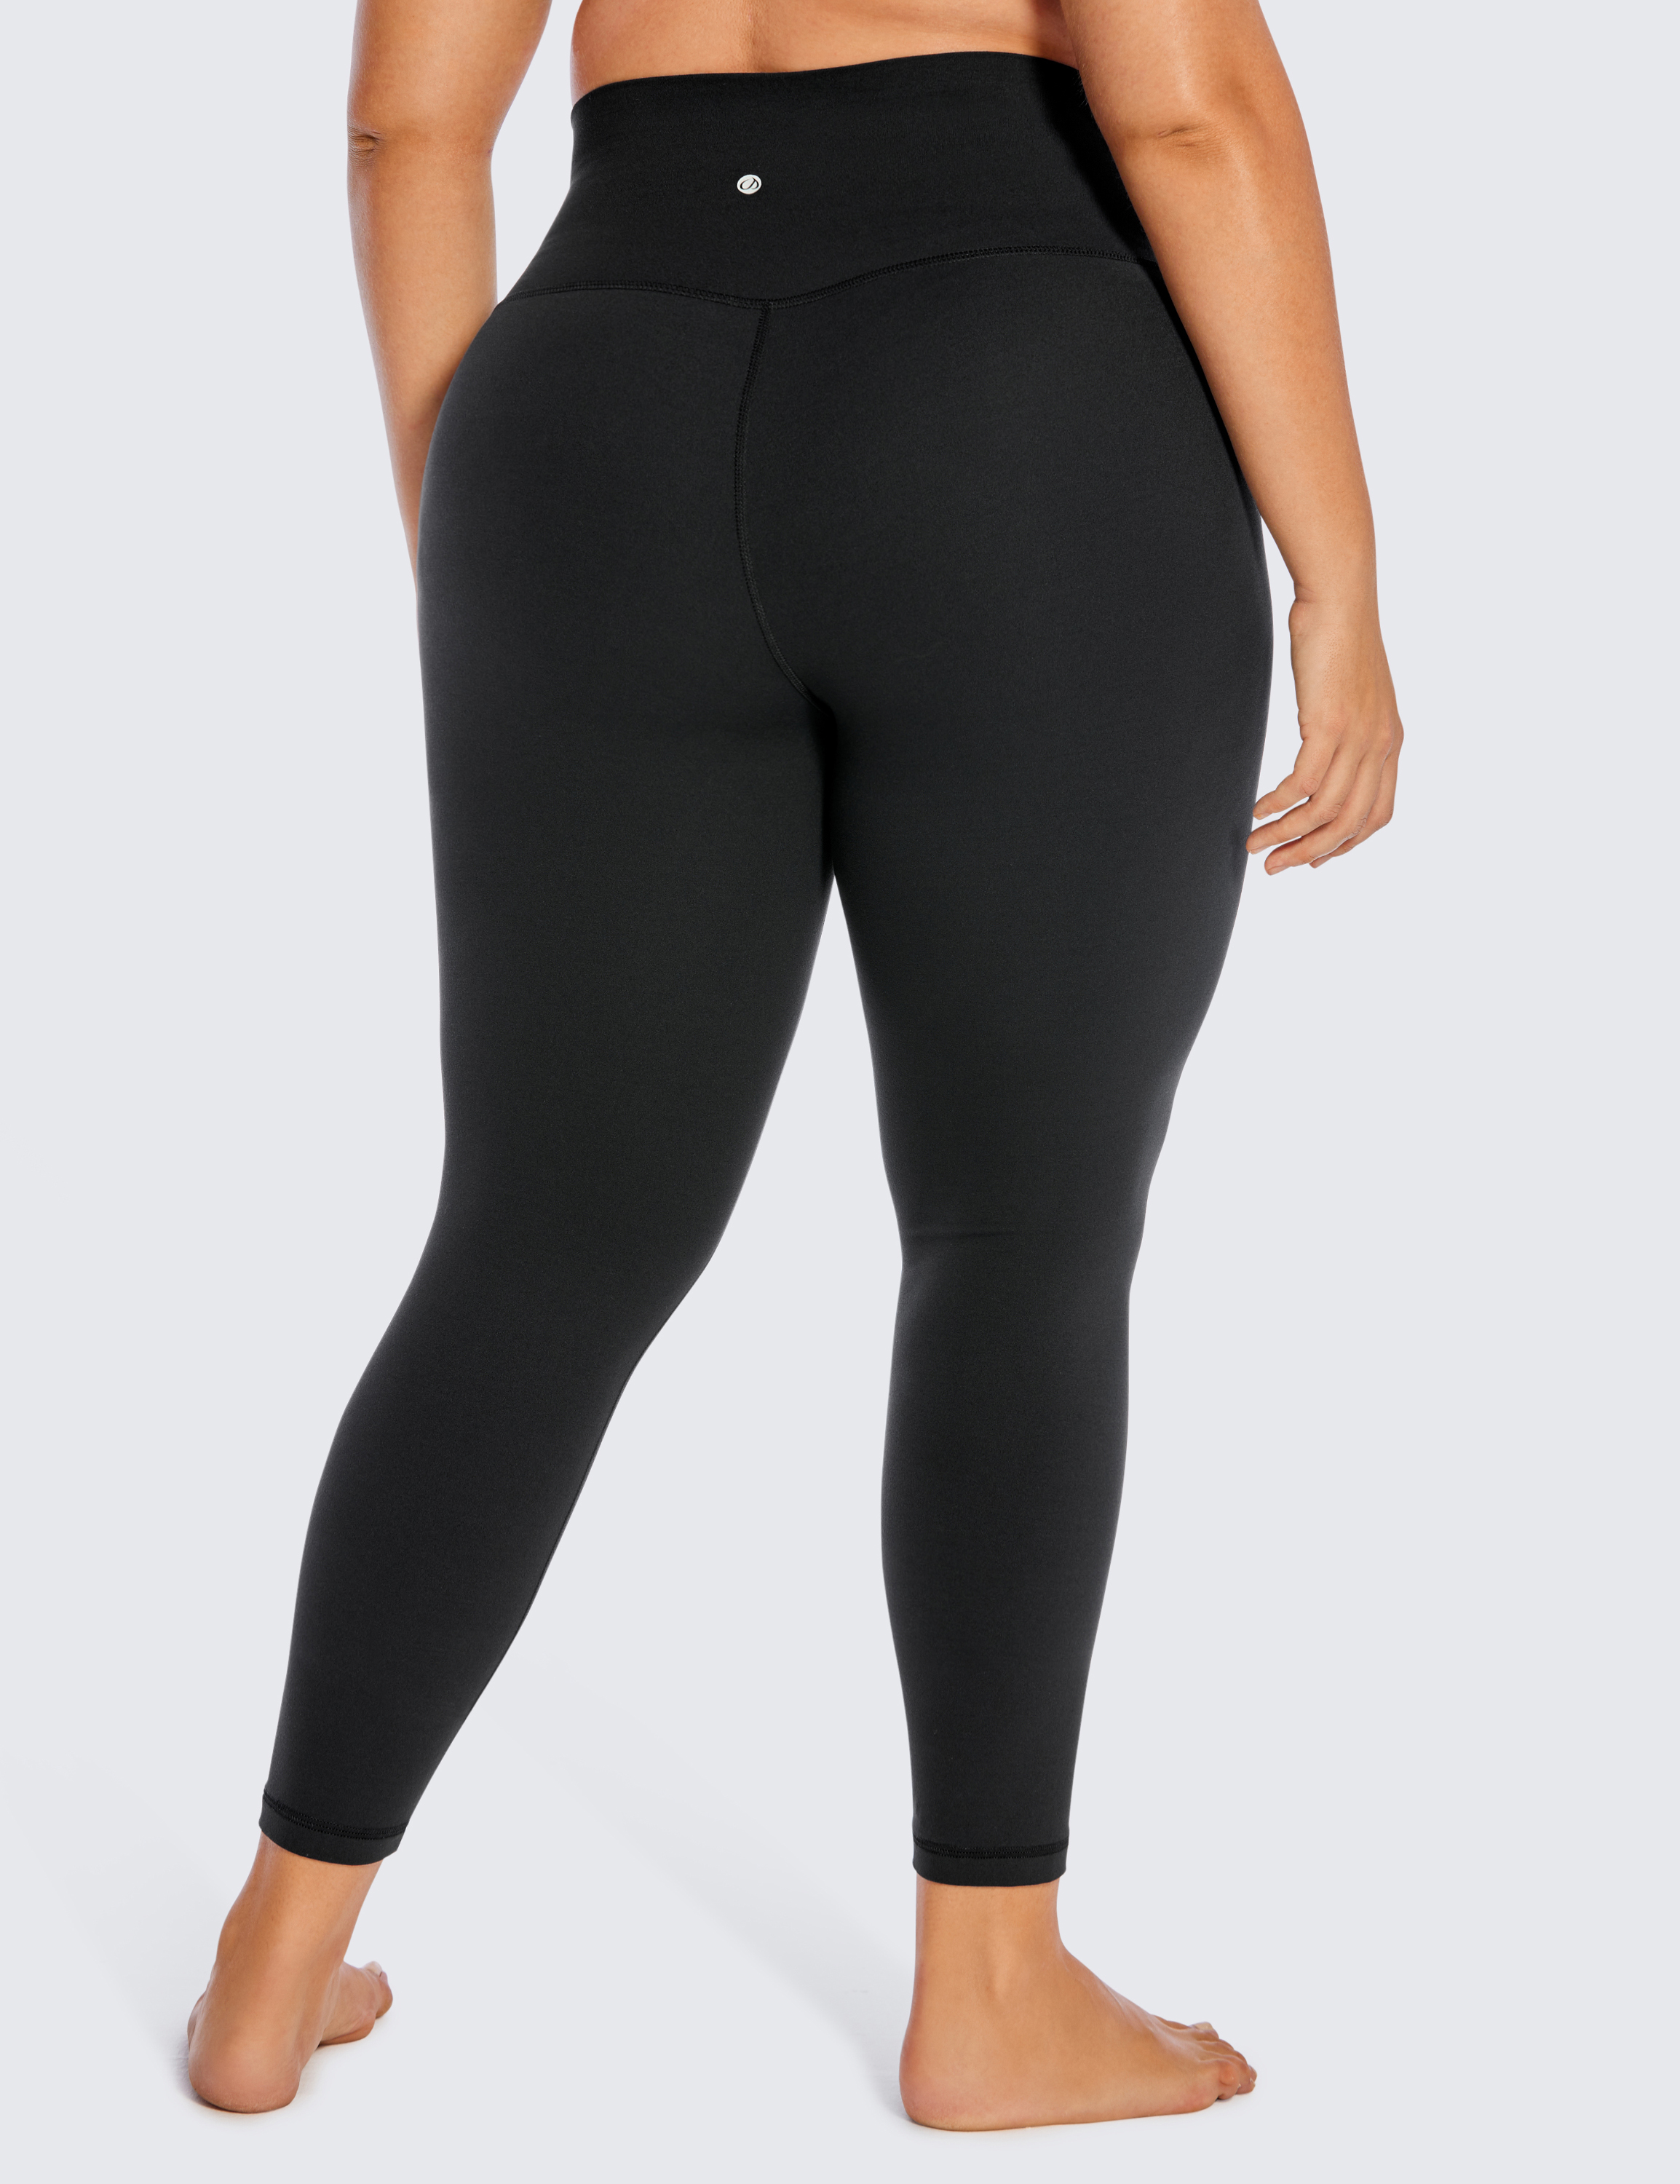 CRZ YOGA Womens Butterluxe Workout Leggings 25 Inches - High